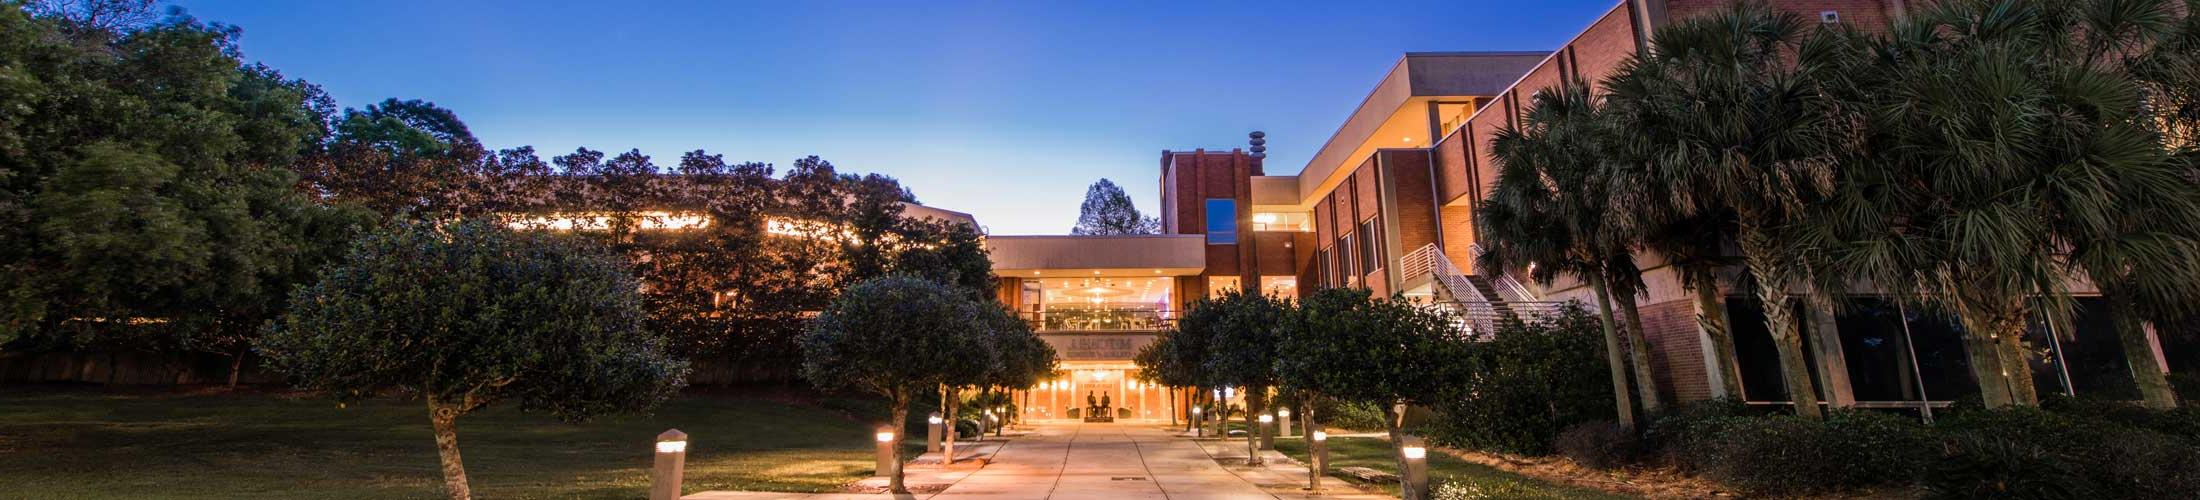 Mitchell College of Business at Night -- Seen as one of the top business schools in Alabama.